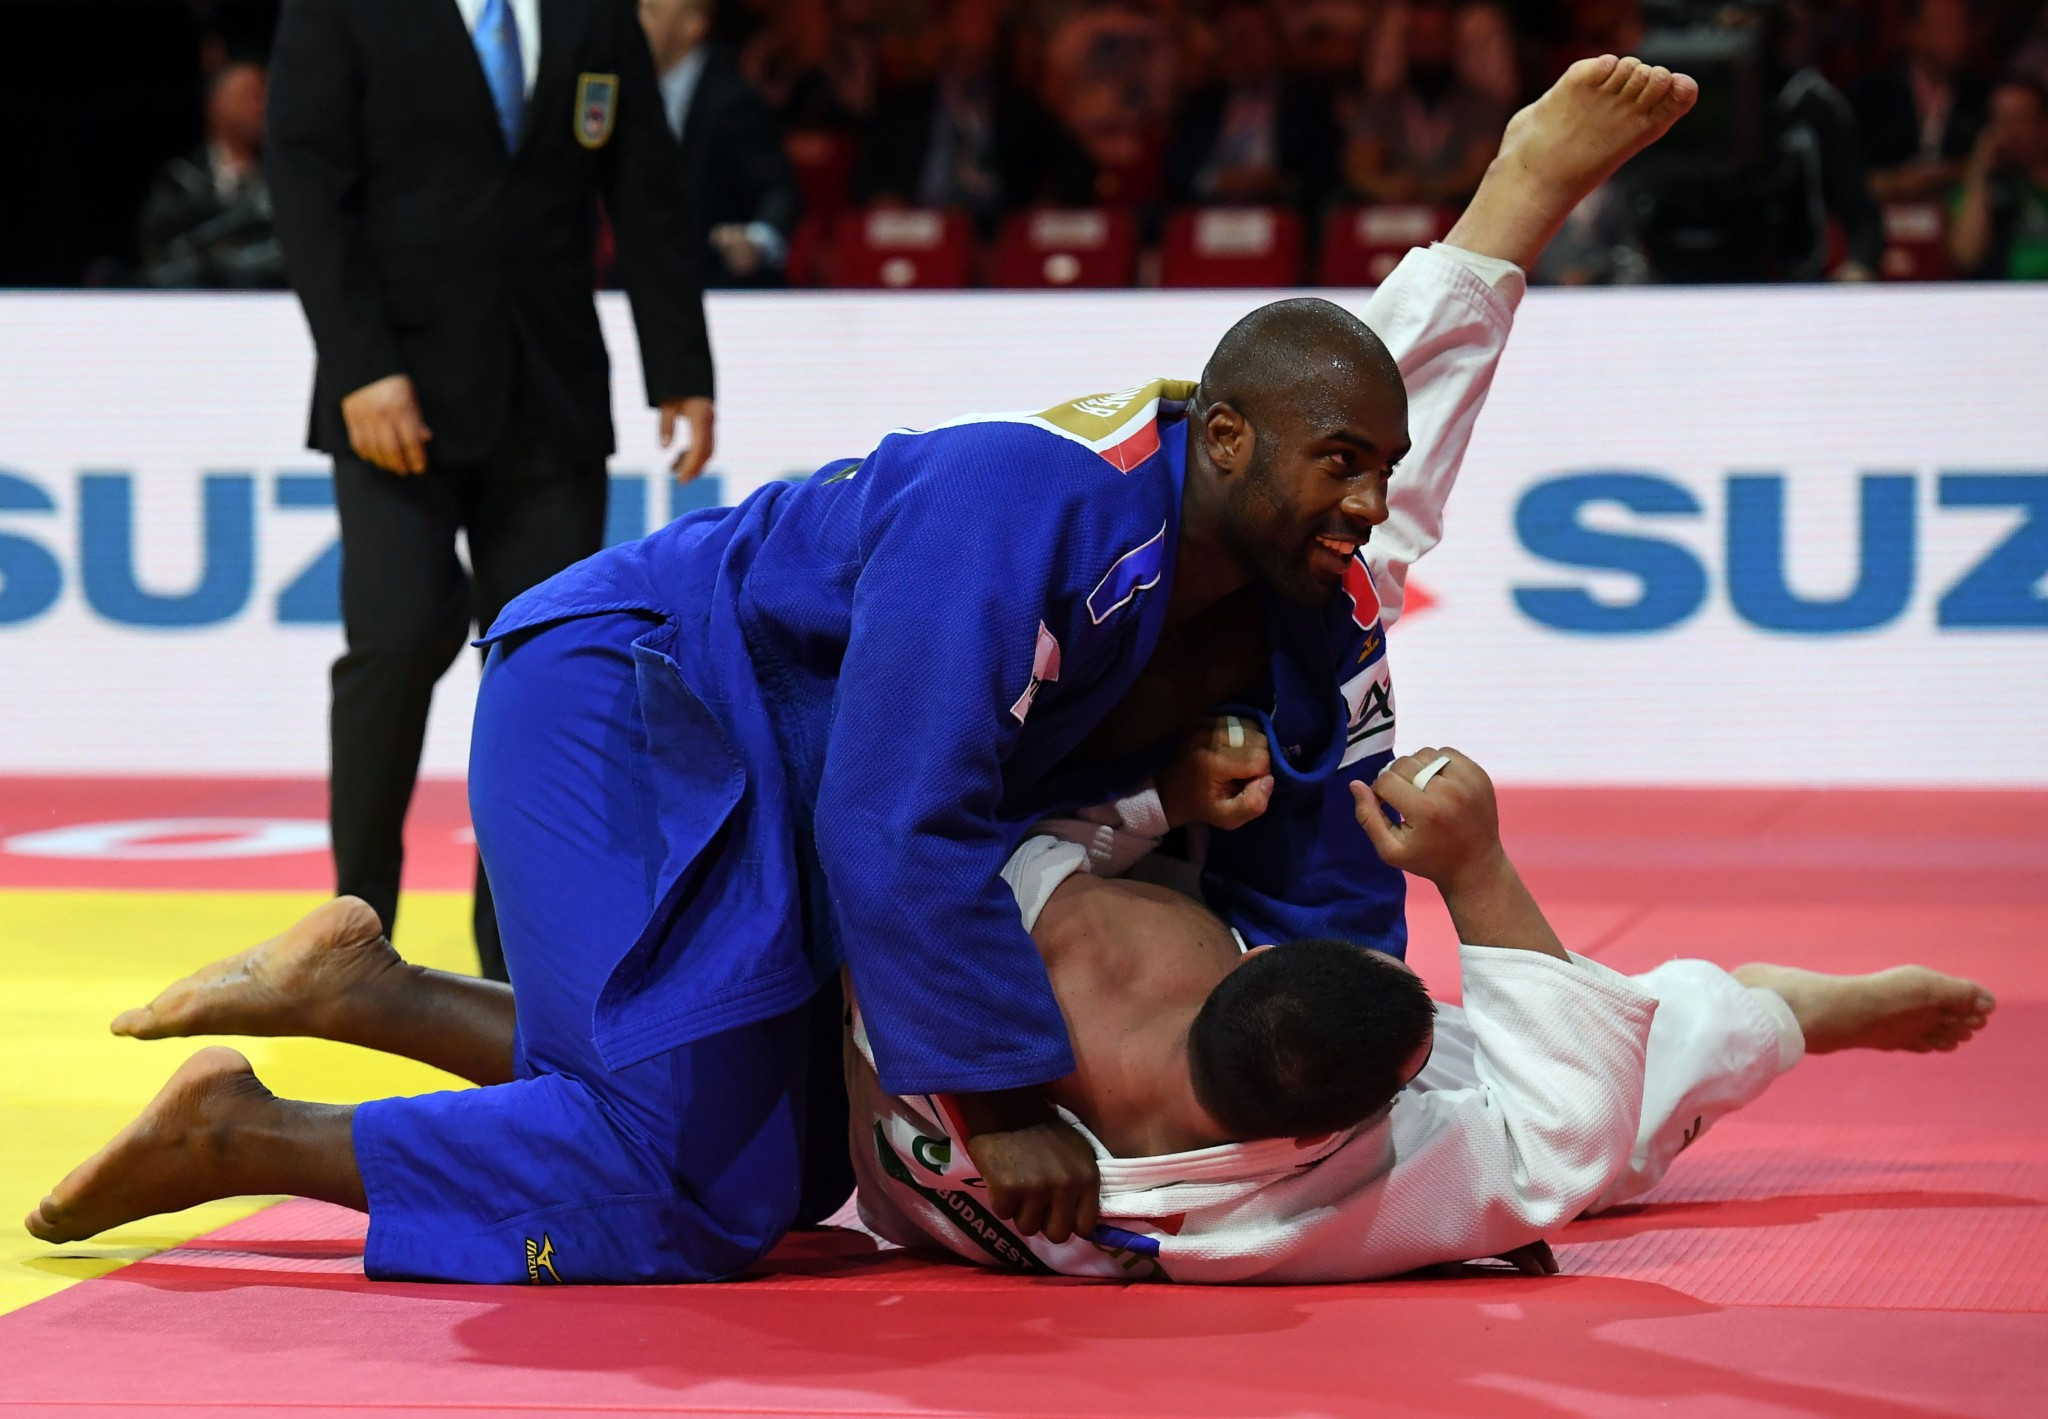 The French star secured his ninth world title with victory by ippon in the golden score period ©Getty Images